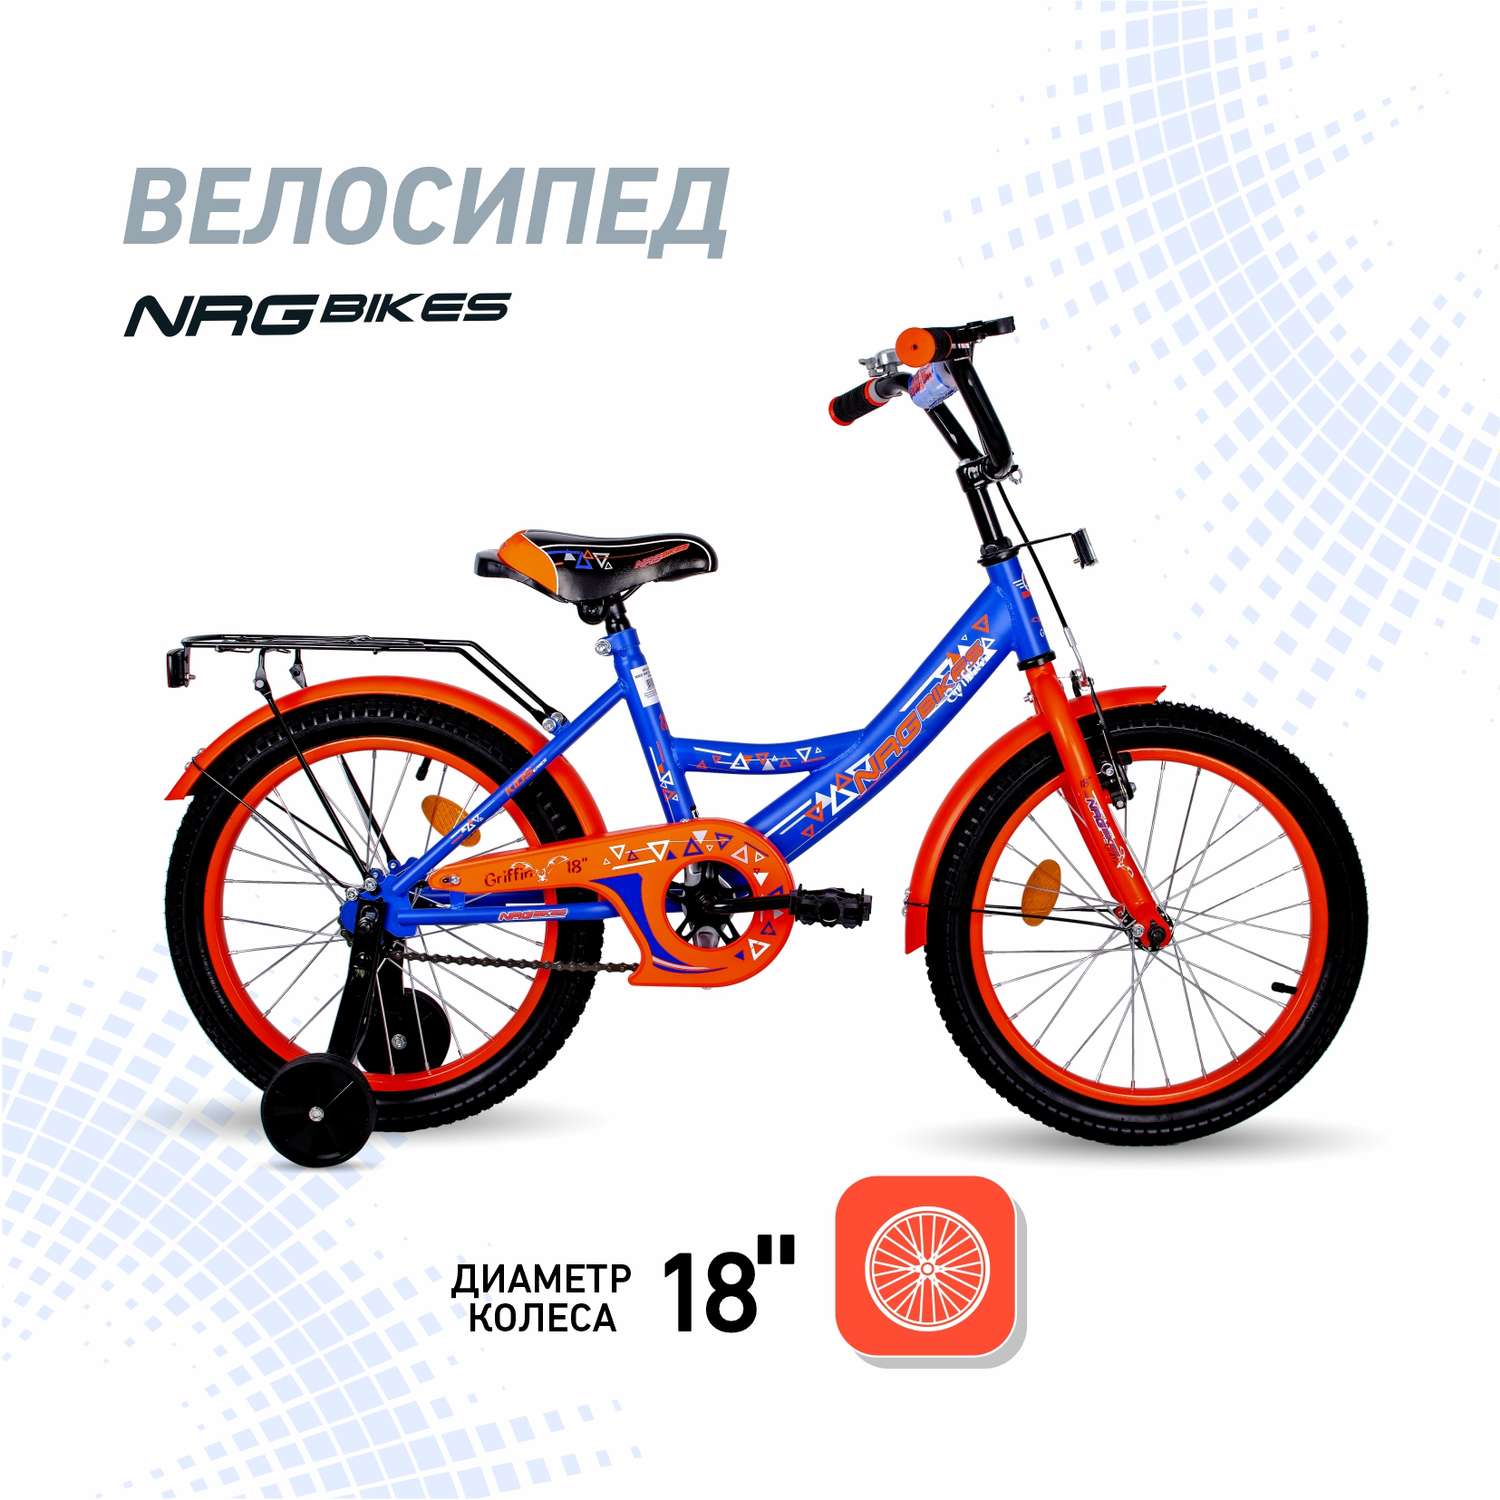 Велосипед NRG BIKES GRIFFIN 18 blue-red - фото 1